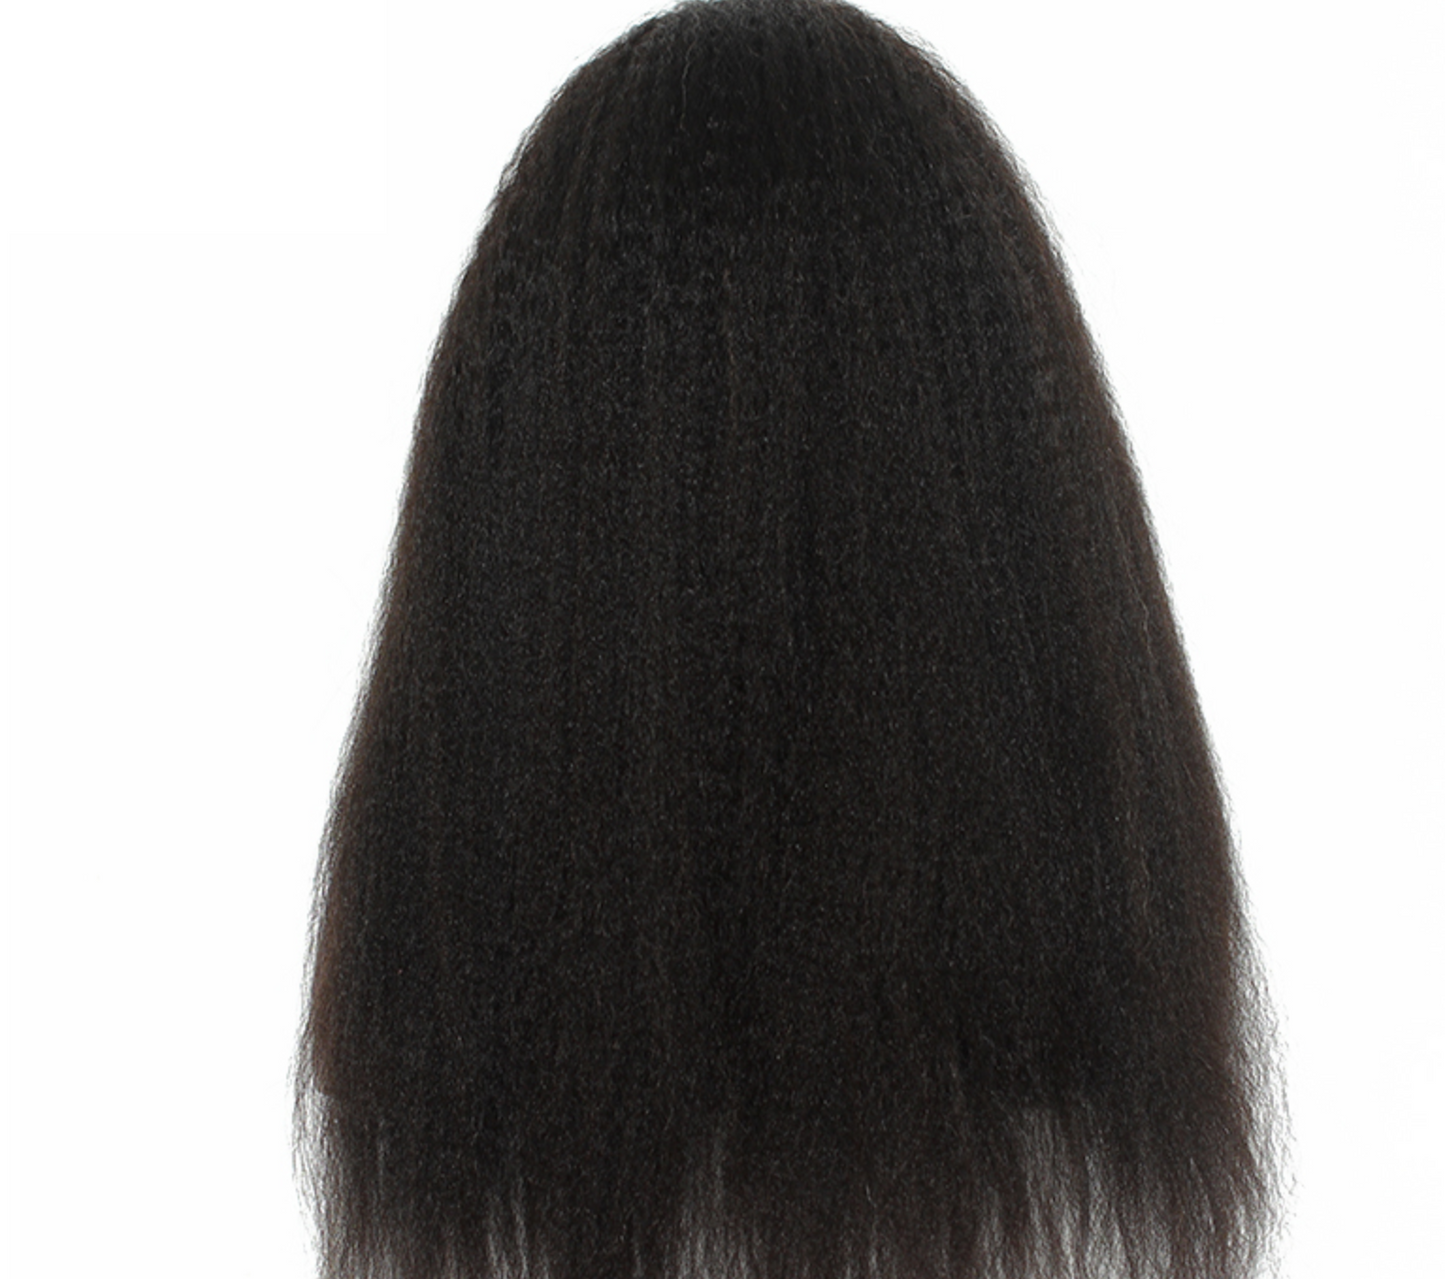 6 by 6 Cambodian Kinky Straight Closure Wig - The Frontal Queen